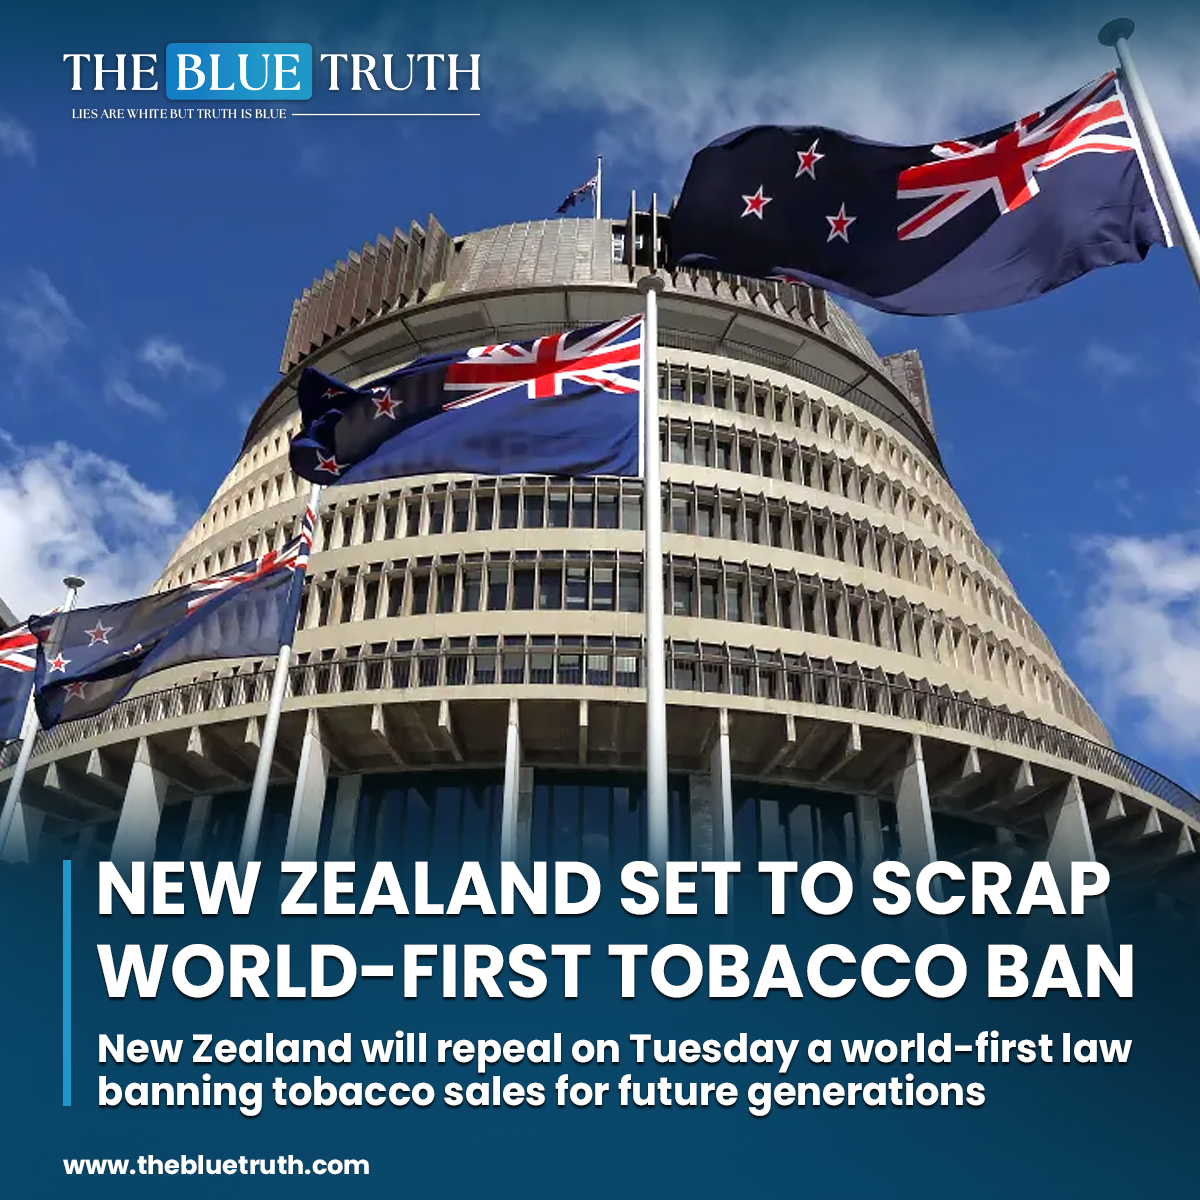 New Zealand will repeal on Tuesday a world-first law banning tobacco sales for future generations.
#NewZealand #TobaccoBan #PublicHealthPolicy #SmokingRegulations
#TobaccoControl #HealthcareNews #PolicyUpdate #tbt #TheBlueTruth